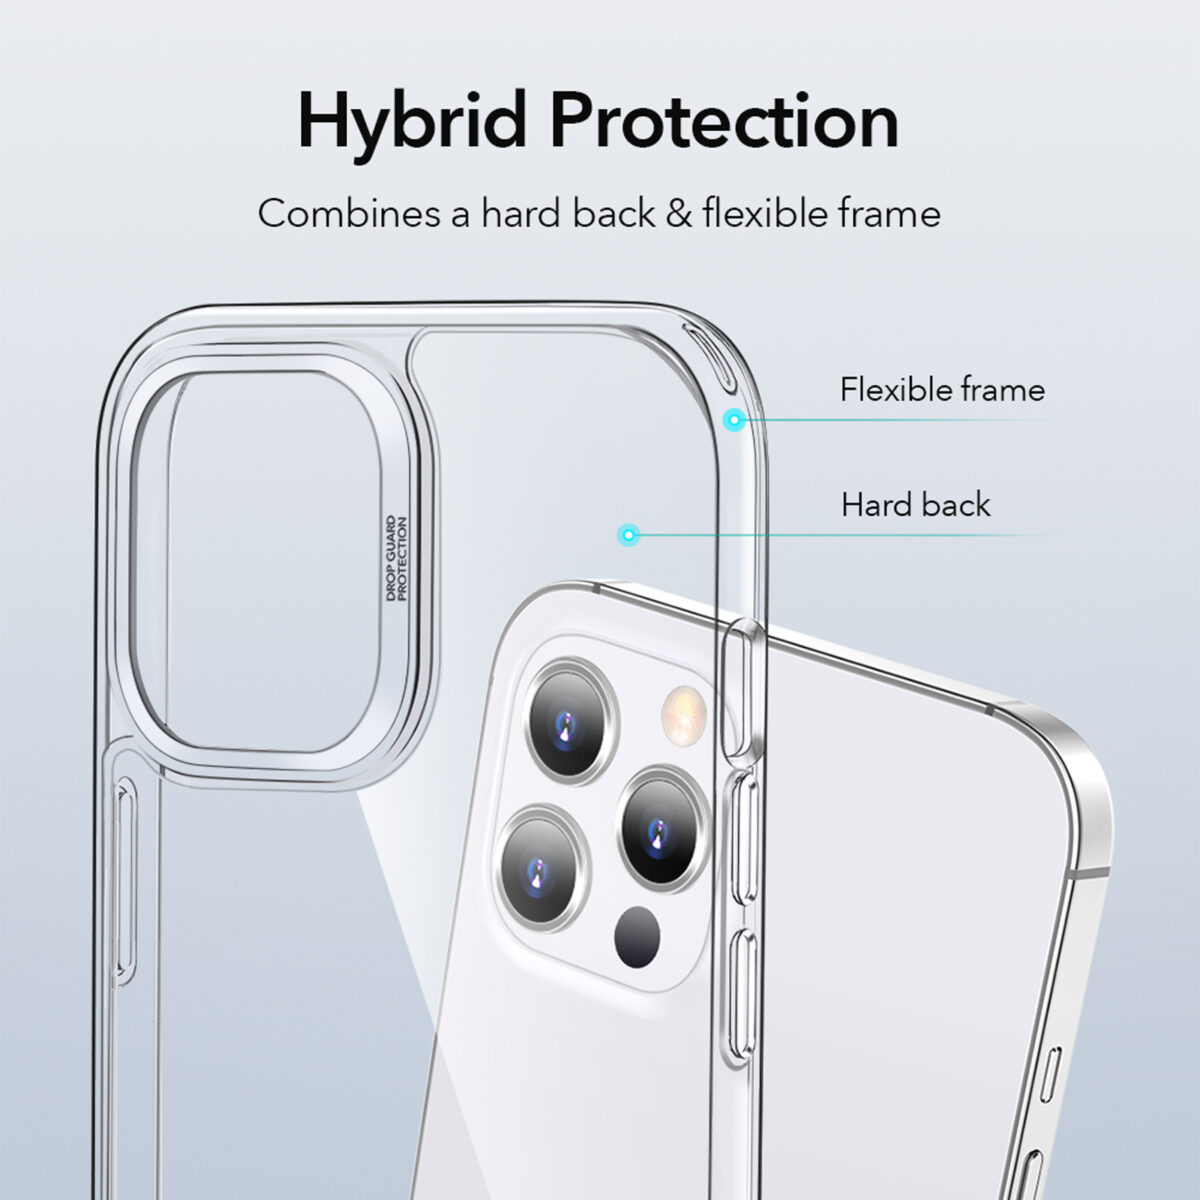 Hybrid protection for iphone with a hard back and flexible frame